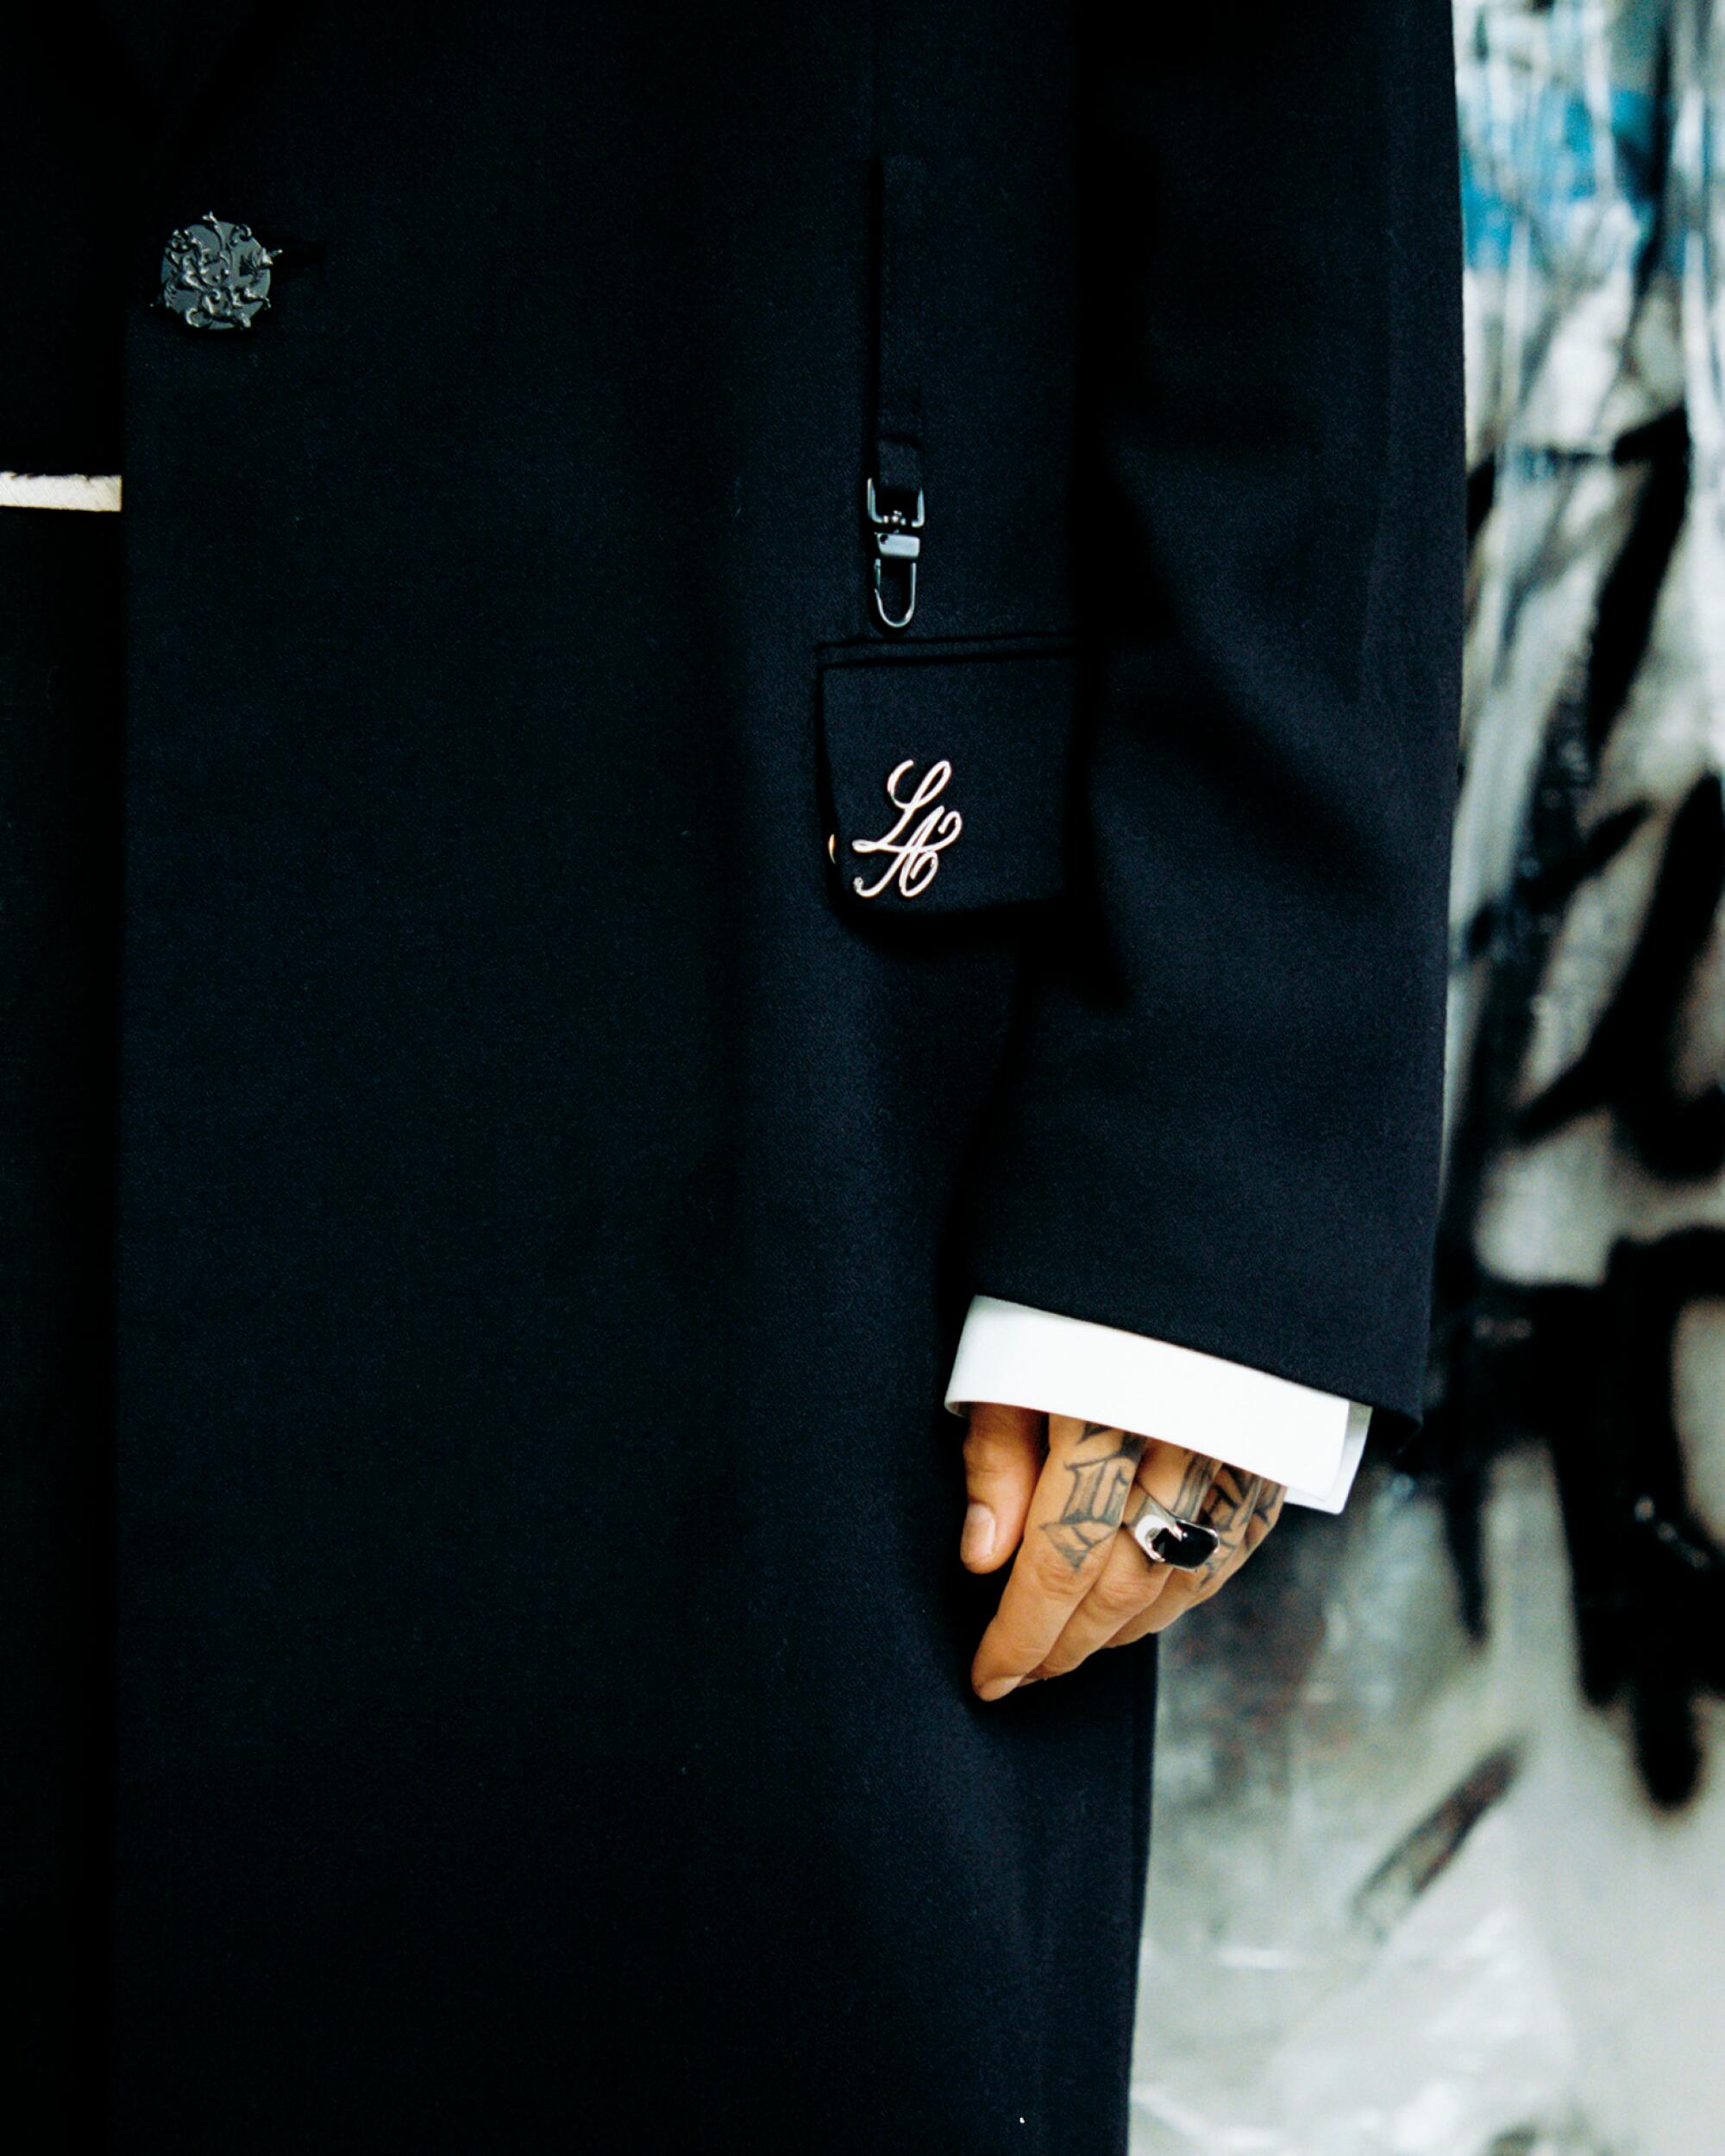 A closeup of a black suit sleeve with a white cuff peeking out.